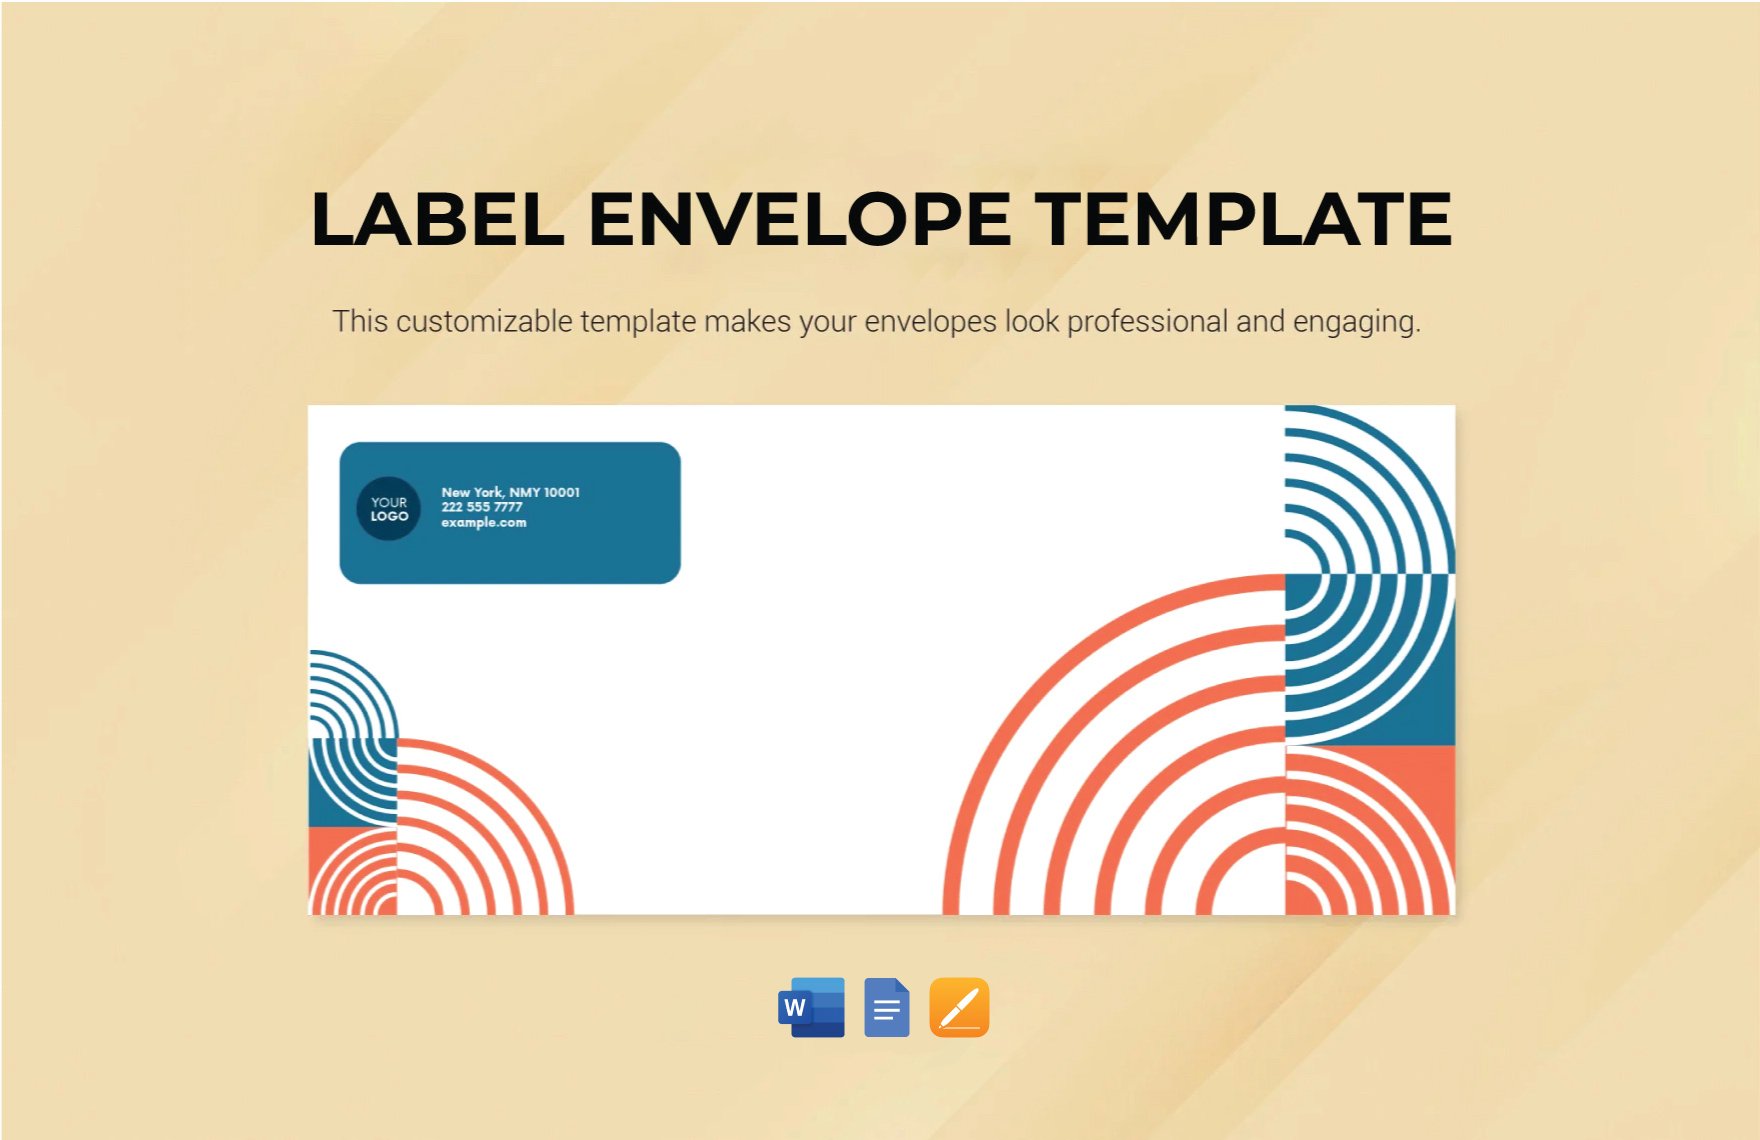 Free Label Envelope Template in Word, Google Docs, Apple Pages